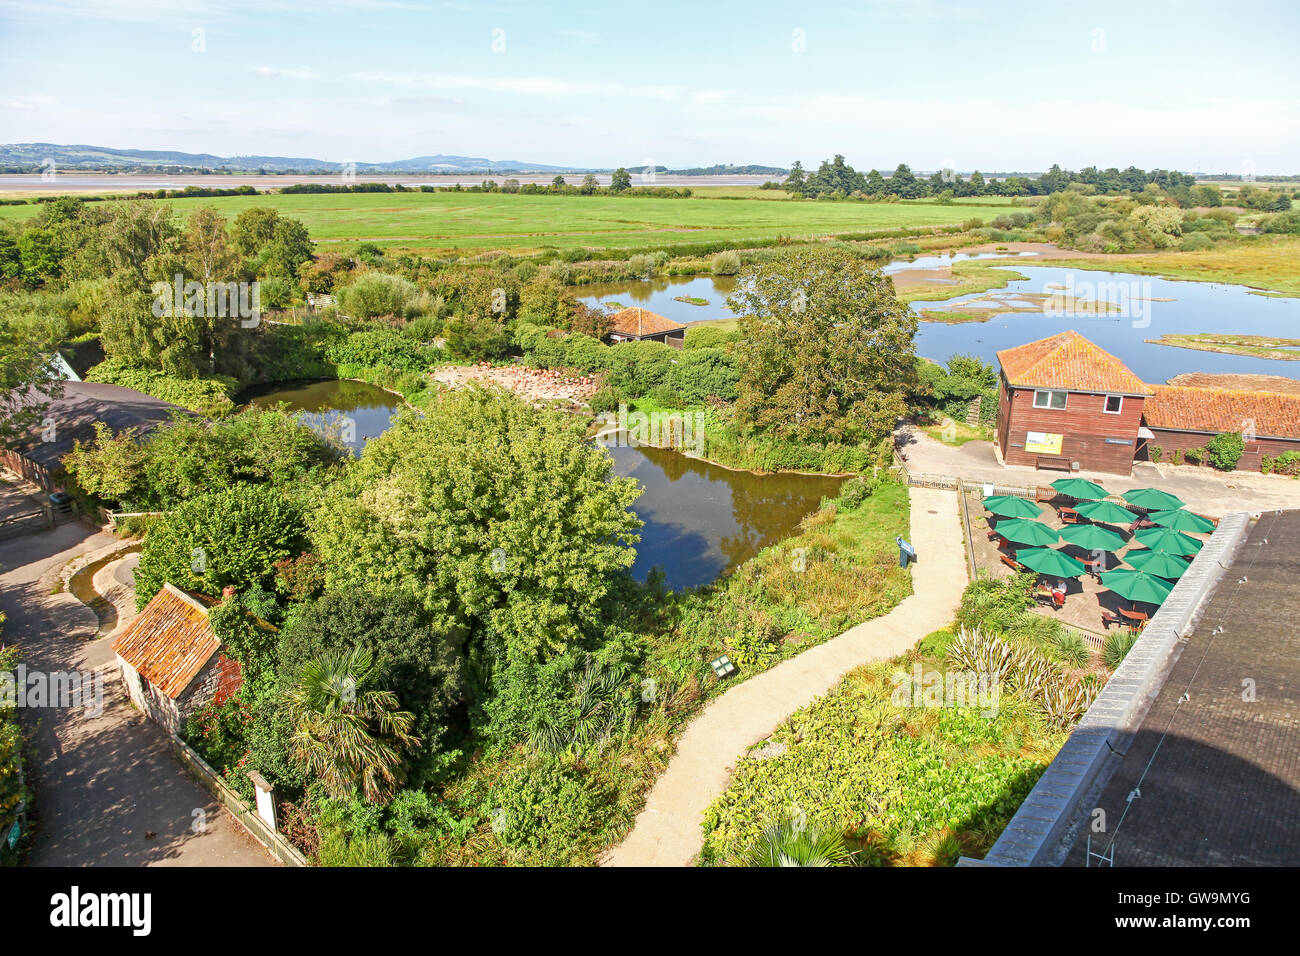 View from the top of the observatory tower over the wetlands at the Wildfowl and Wetlands Trust Slimbridge Wetland Centre, Gloustershire, England Stock Photo